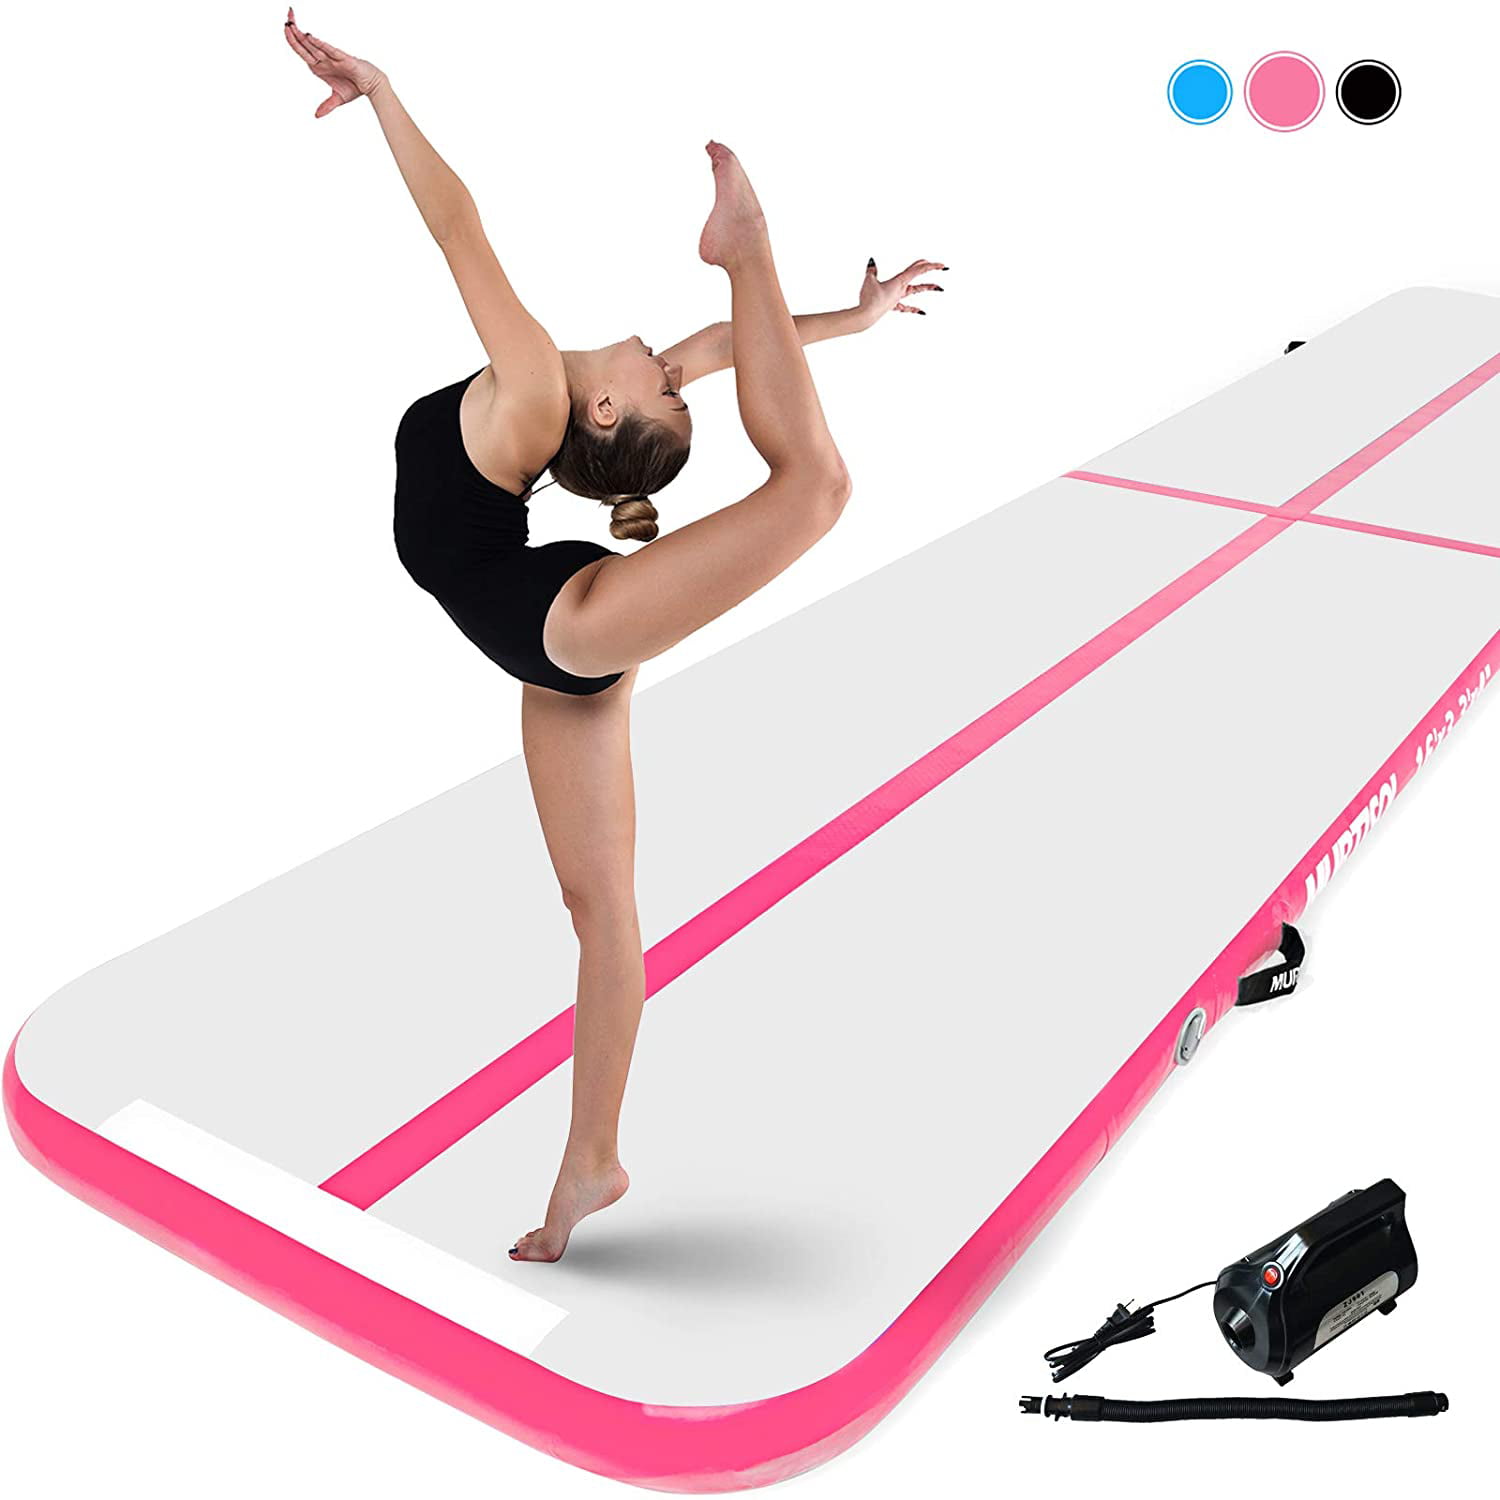 Details about   300x50x10cm Inflatable Air Track Tumbling Gymnastic Training Pad GYM Mat Cushion 